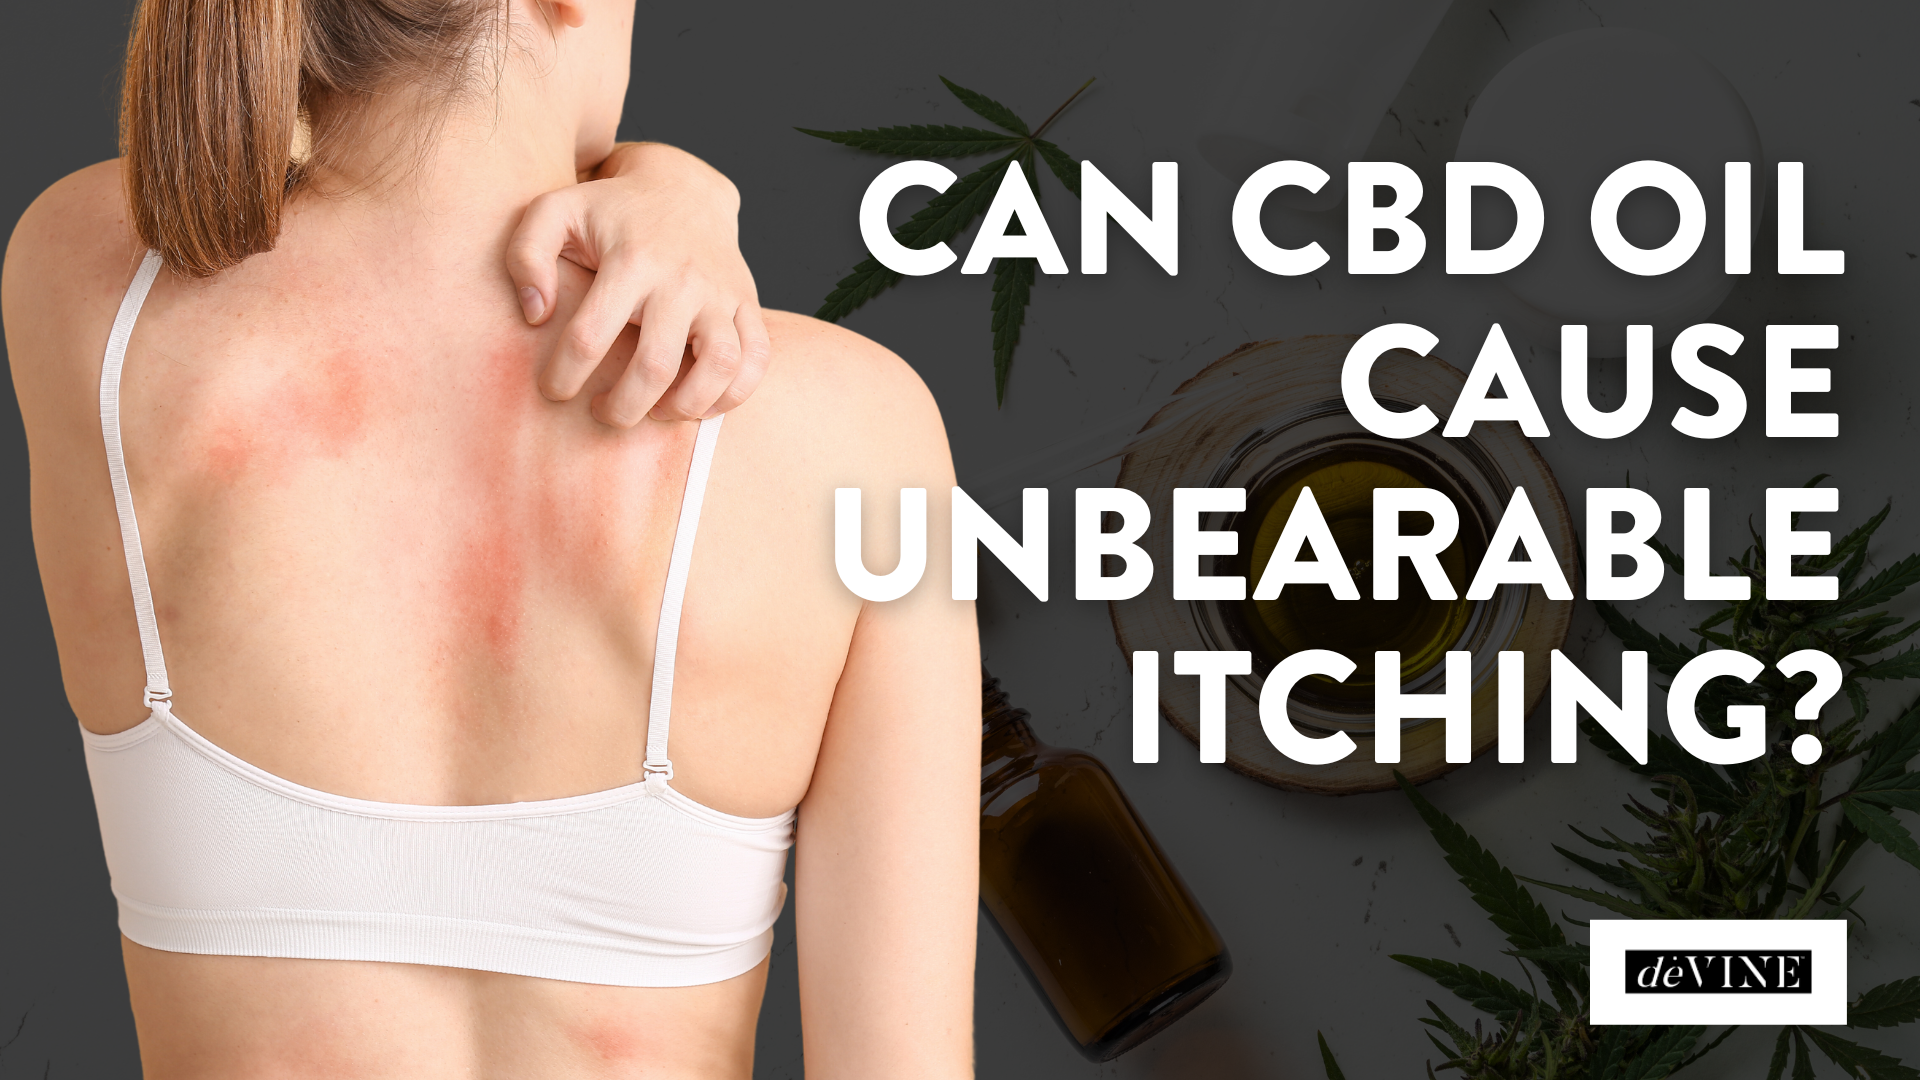 Can CBD Oil Cause Unbearable Itching?